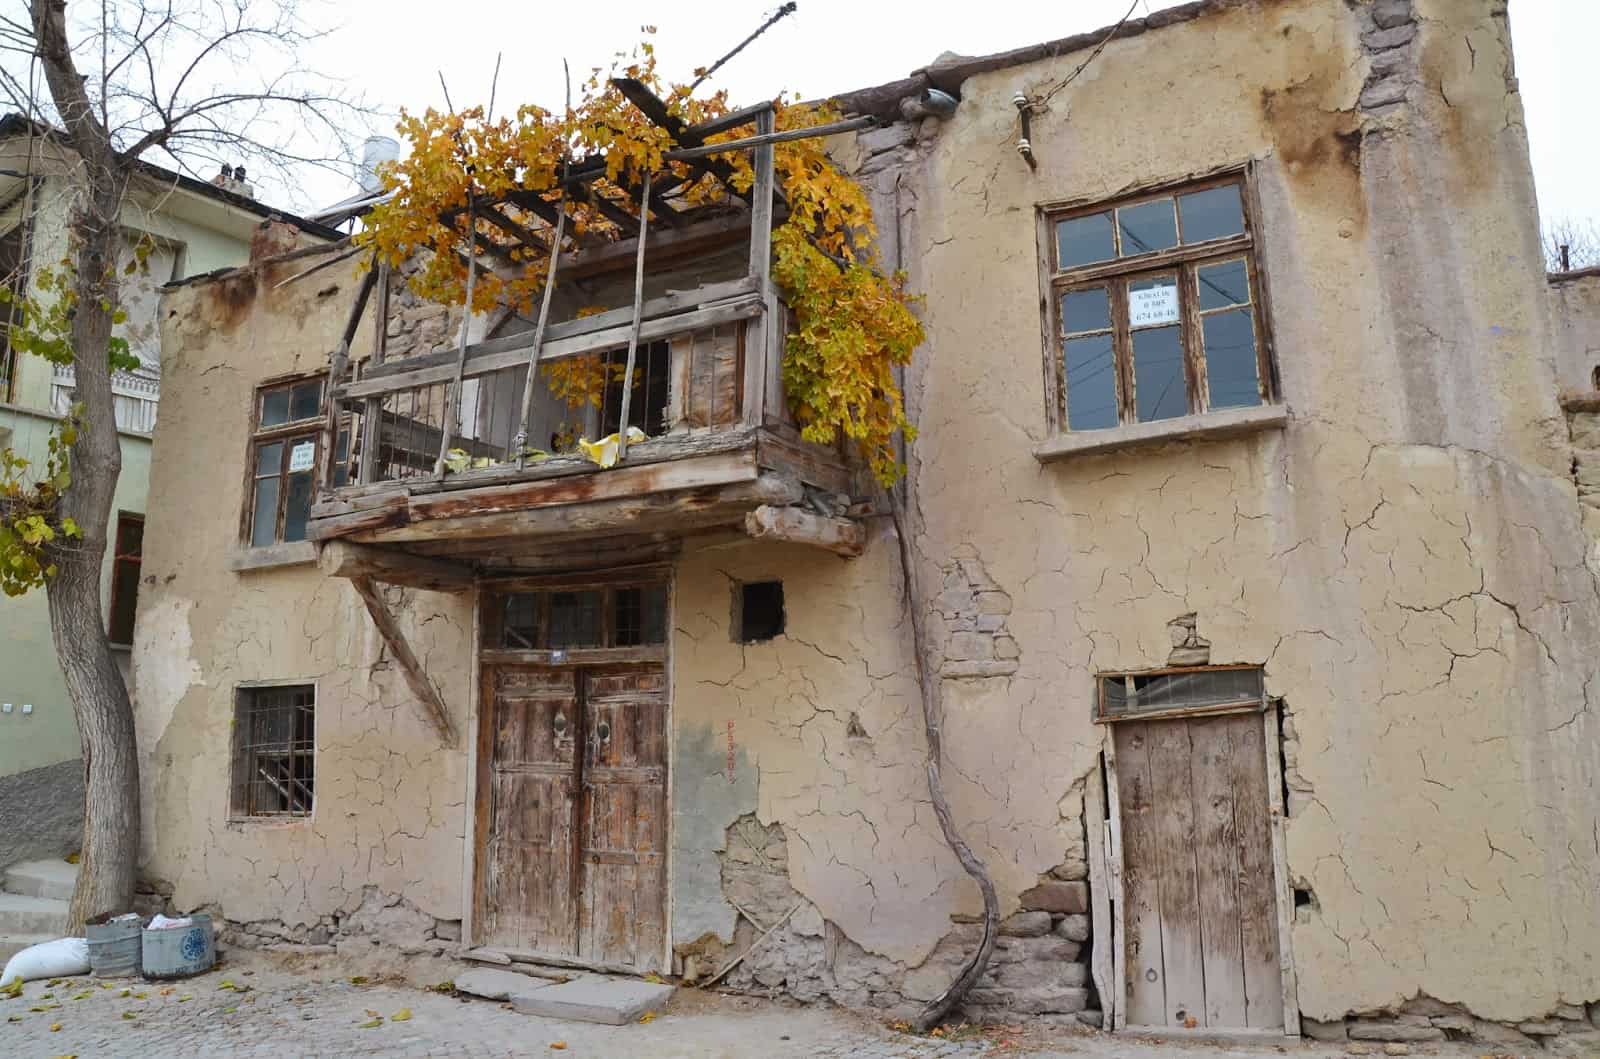 A house in Sille, Turkey